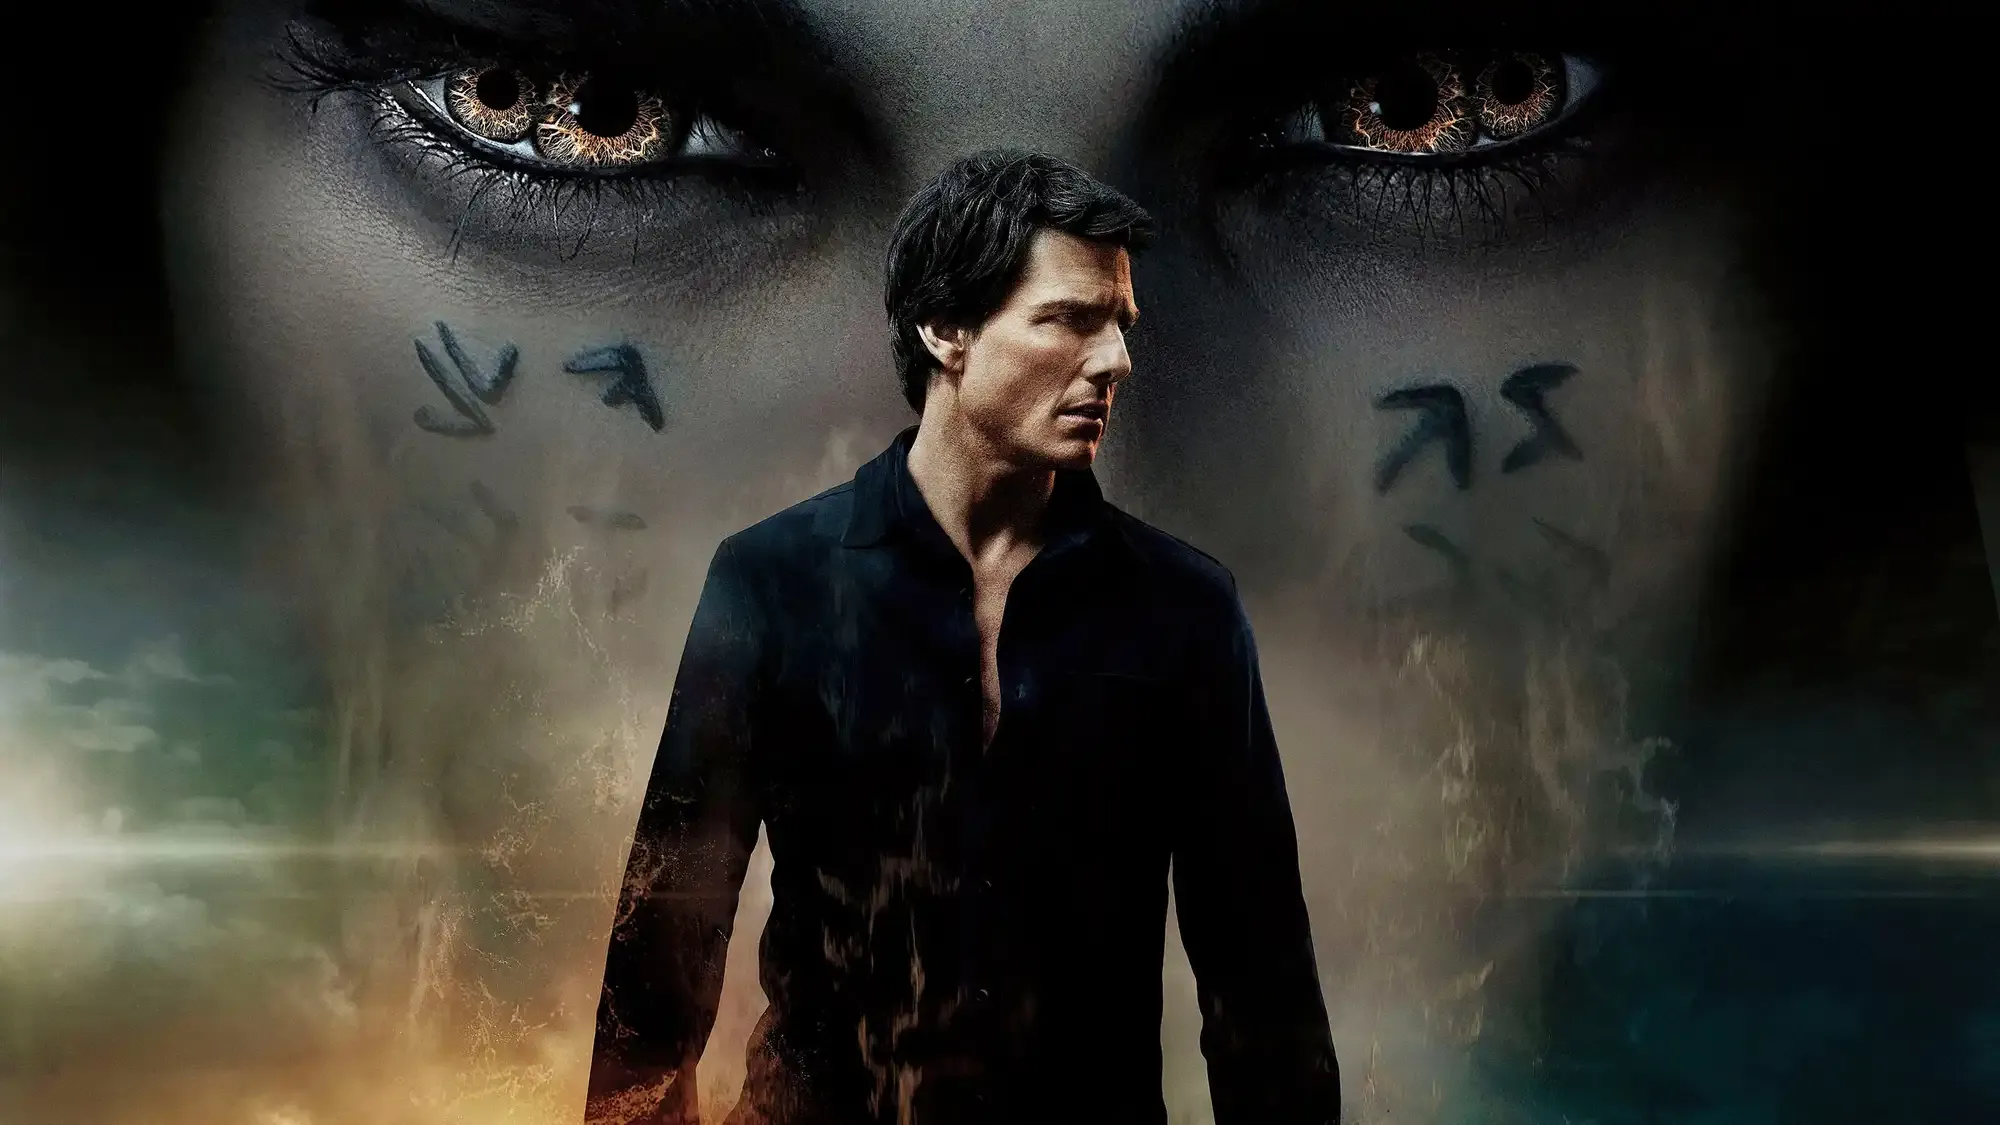 The Mummy movie review